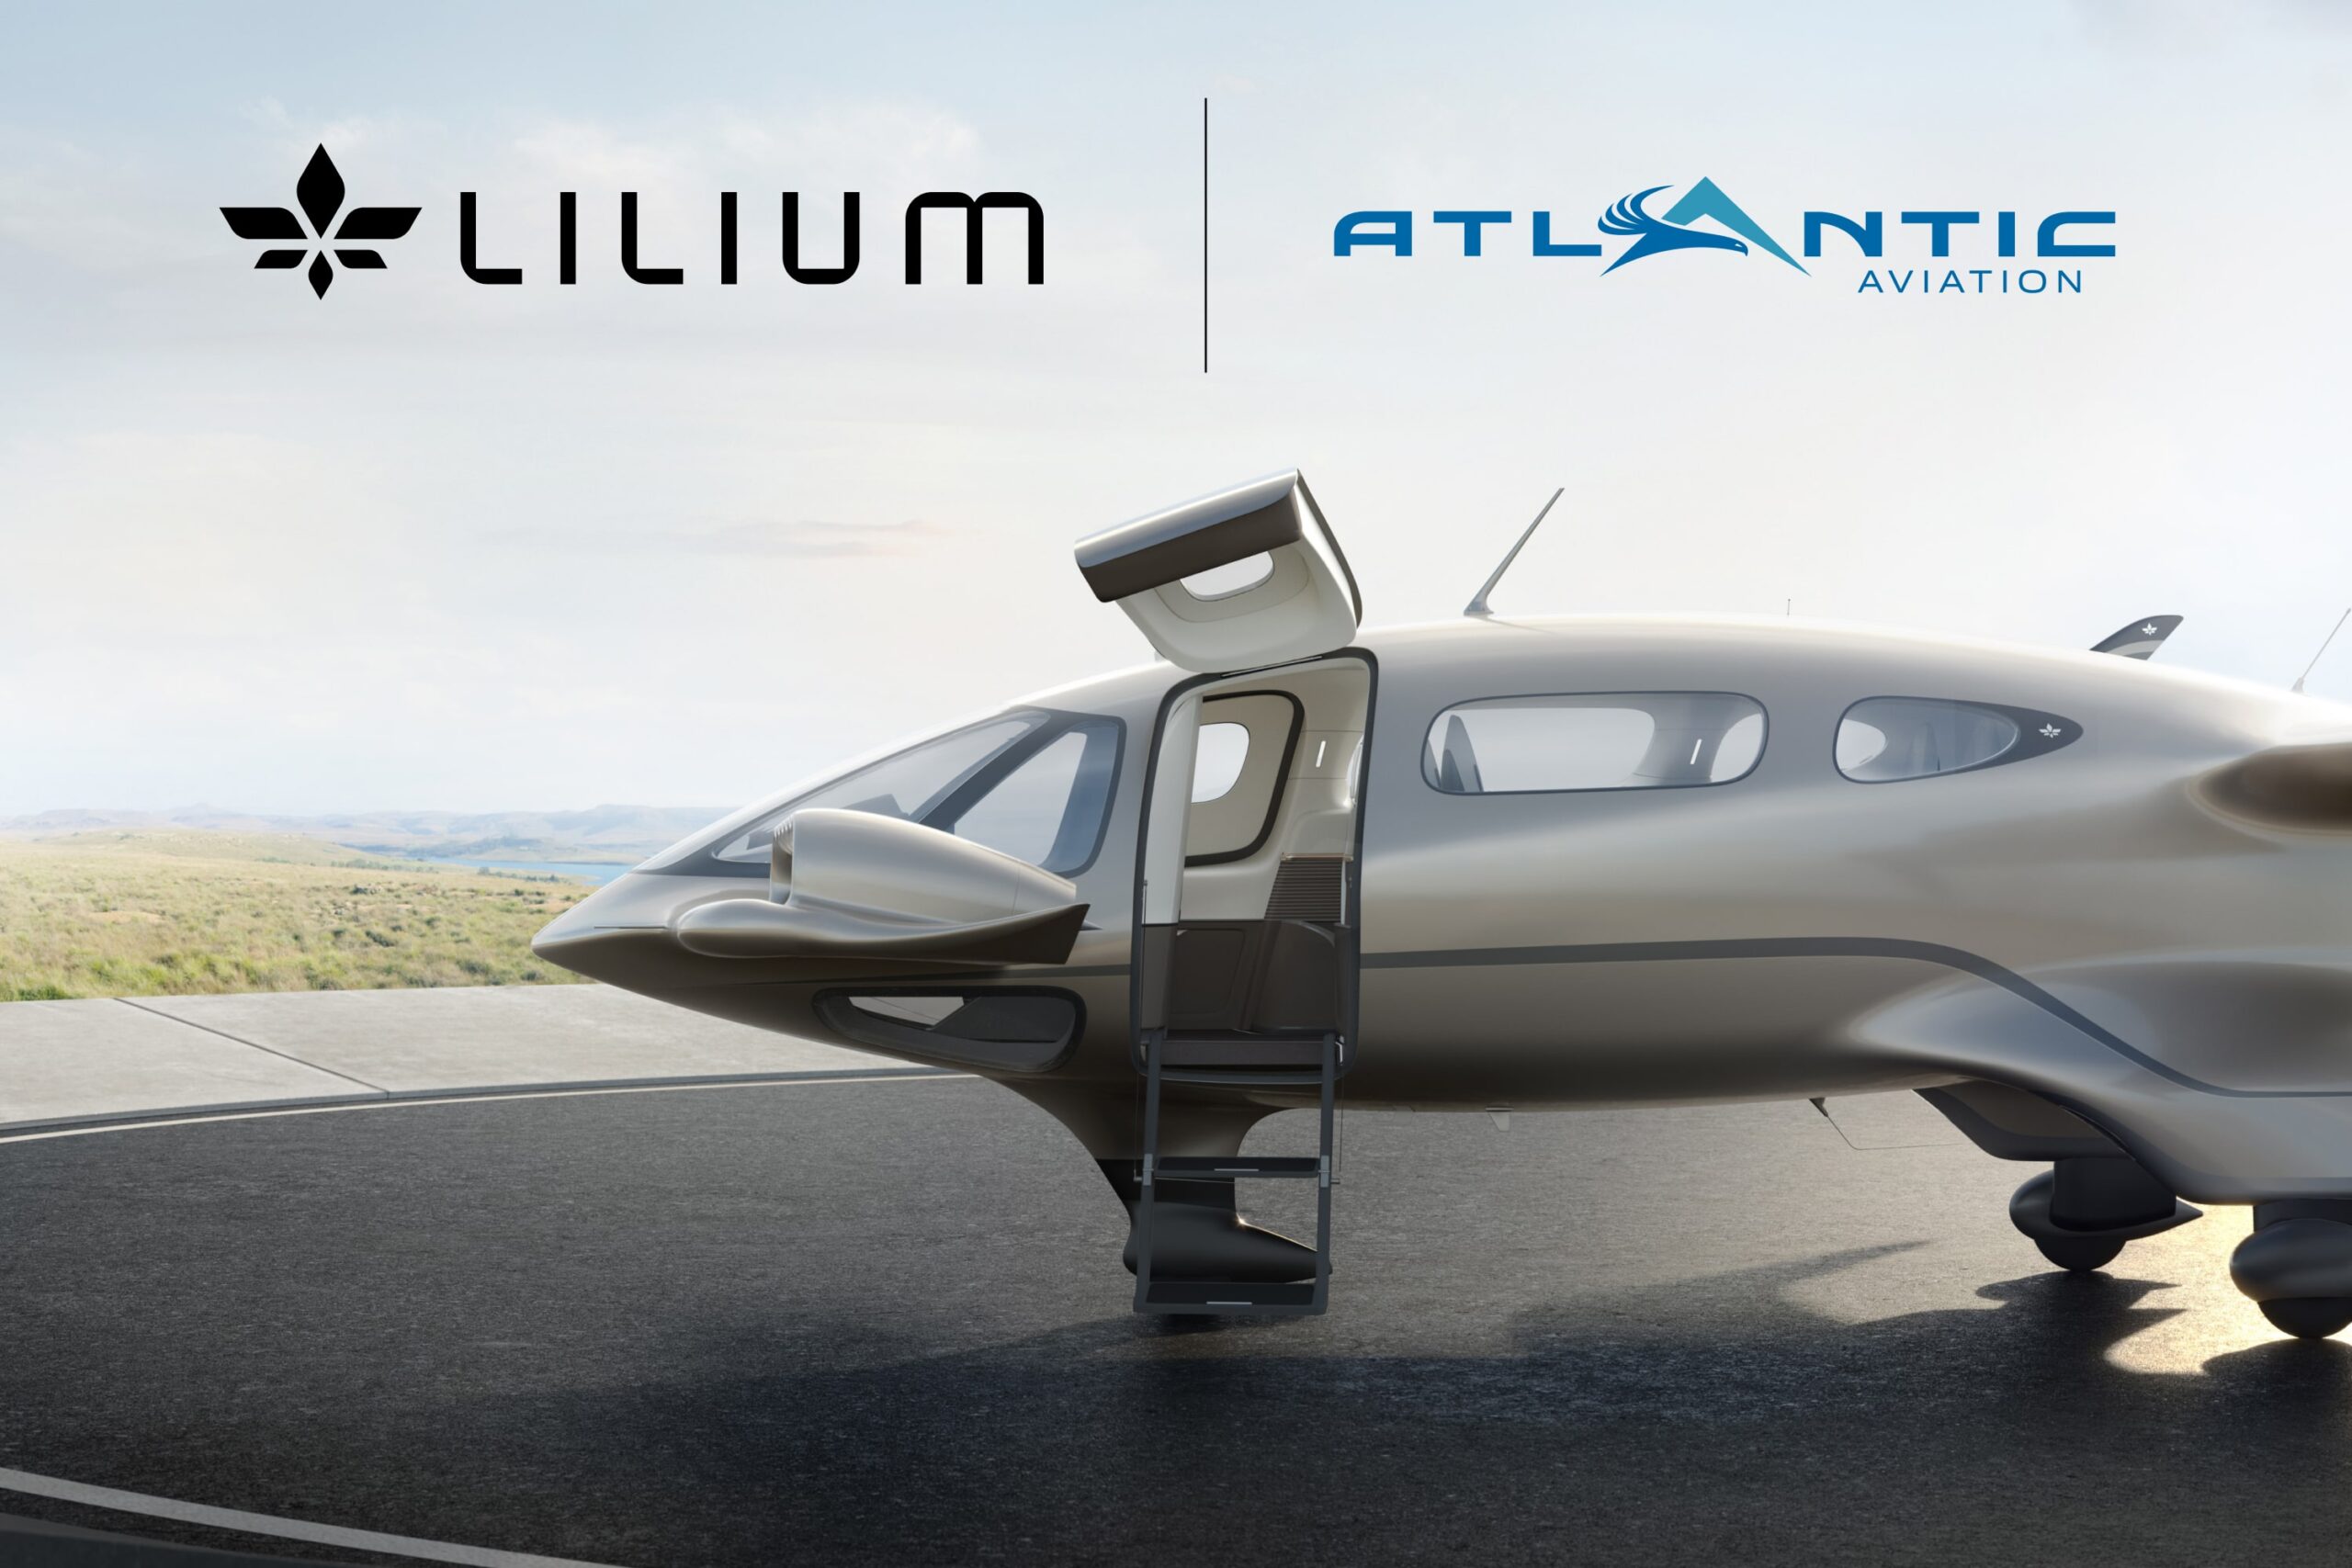 Lilium and Atlantic Aviation announce they have signed an MOU to electrify existing airport infrastructure and support regional air mobility  